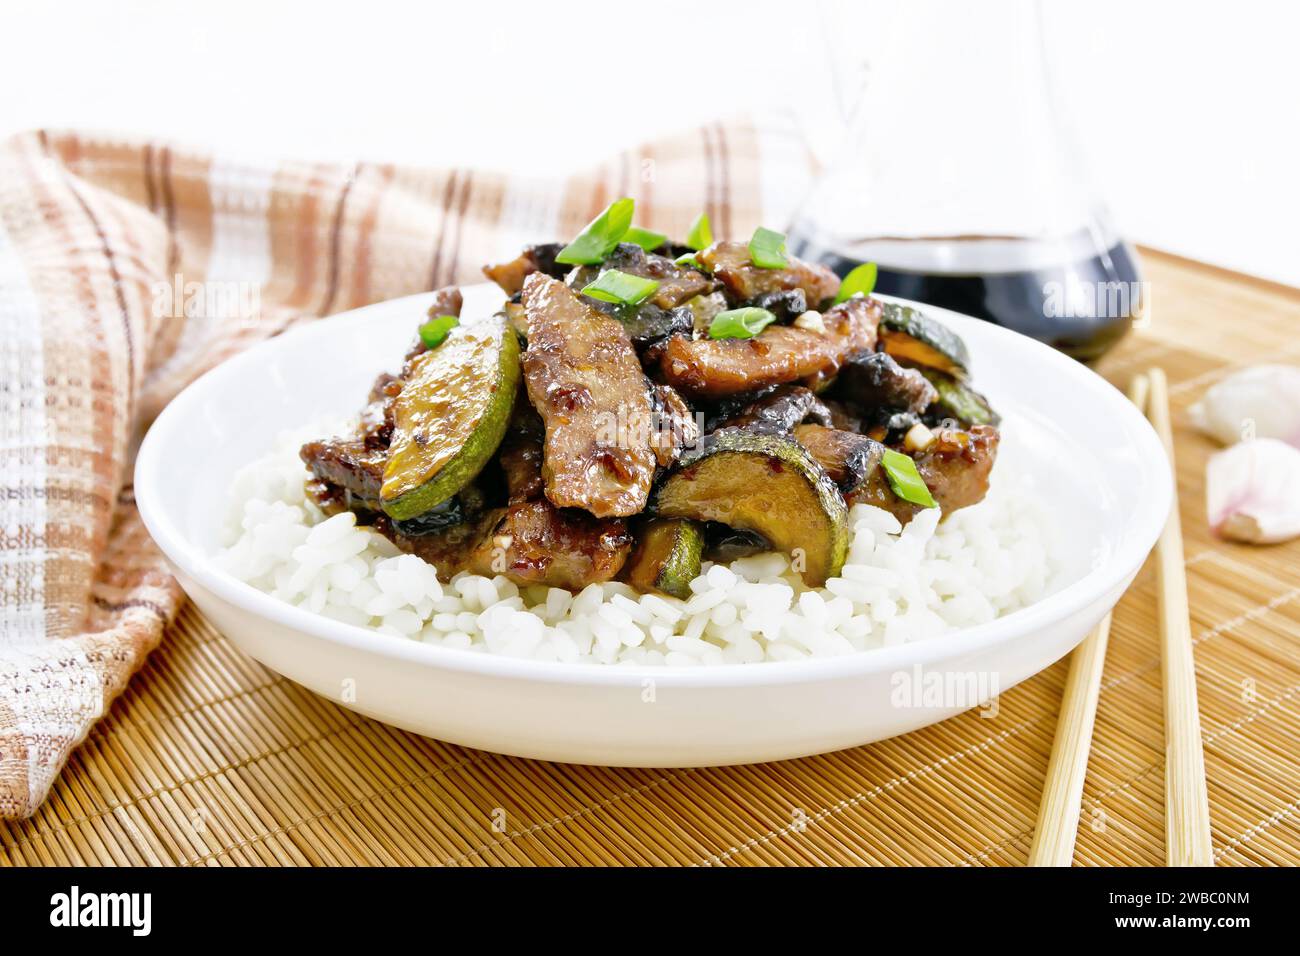 Chinese stir-fried dish of chicken meat with zucchini, mushrooms, soy sauce and rice garnish in a plate on a bamboo napkin, a towel and garlic on wood Stock Photo